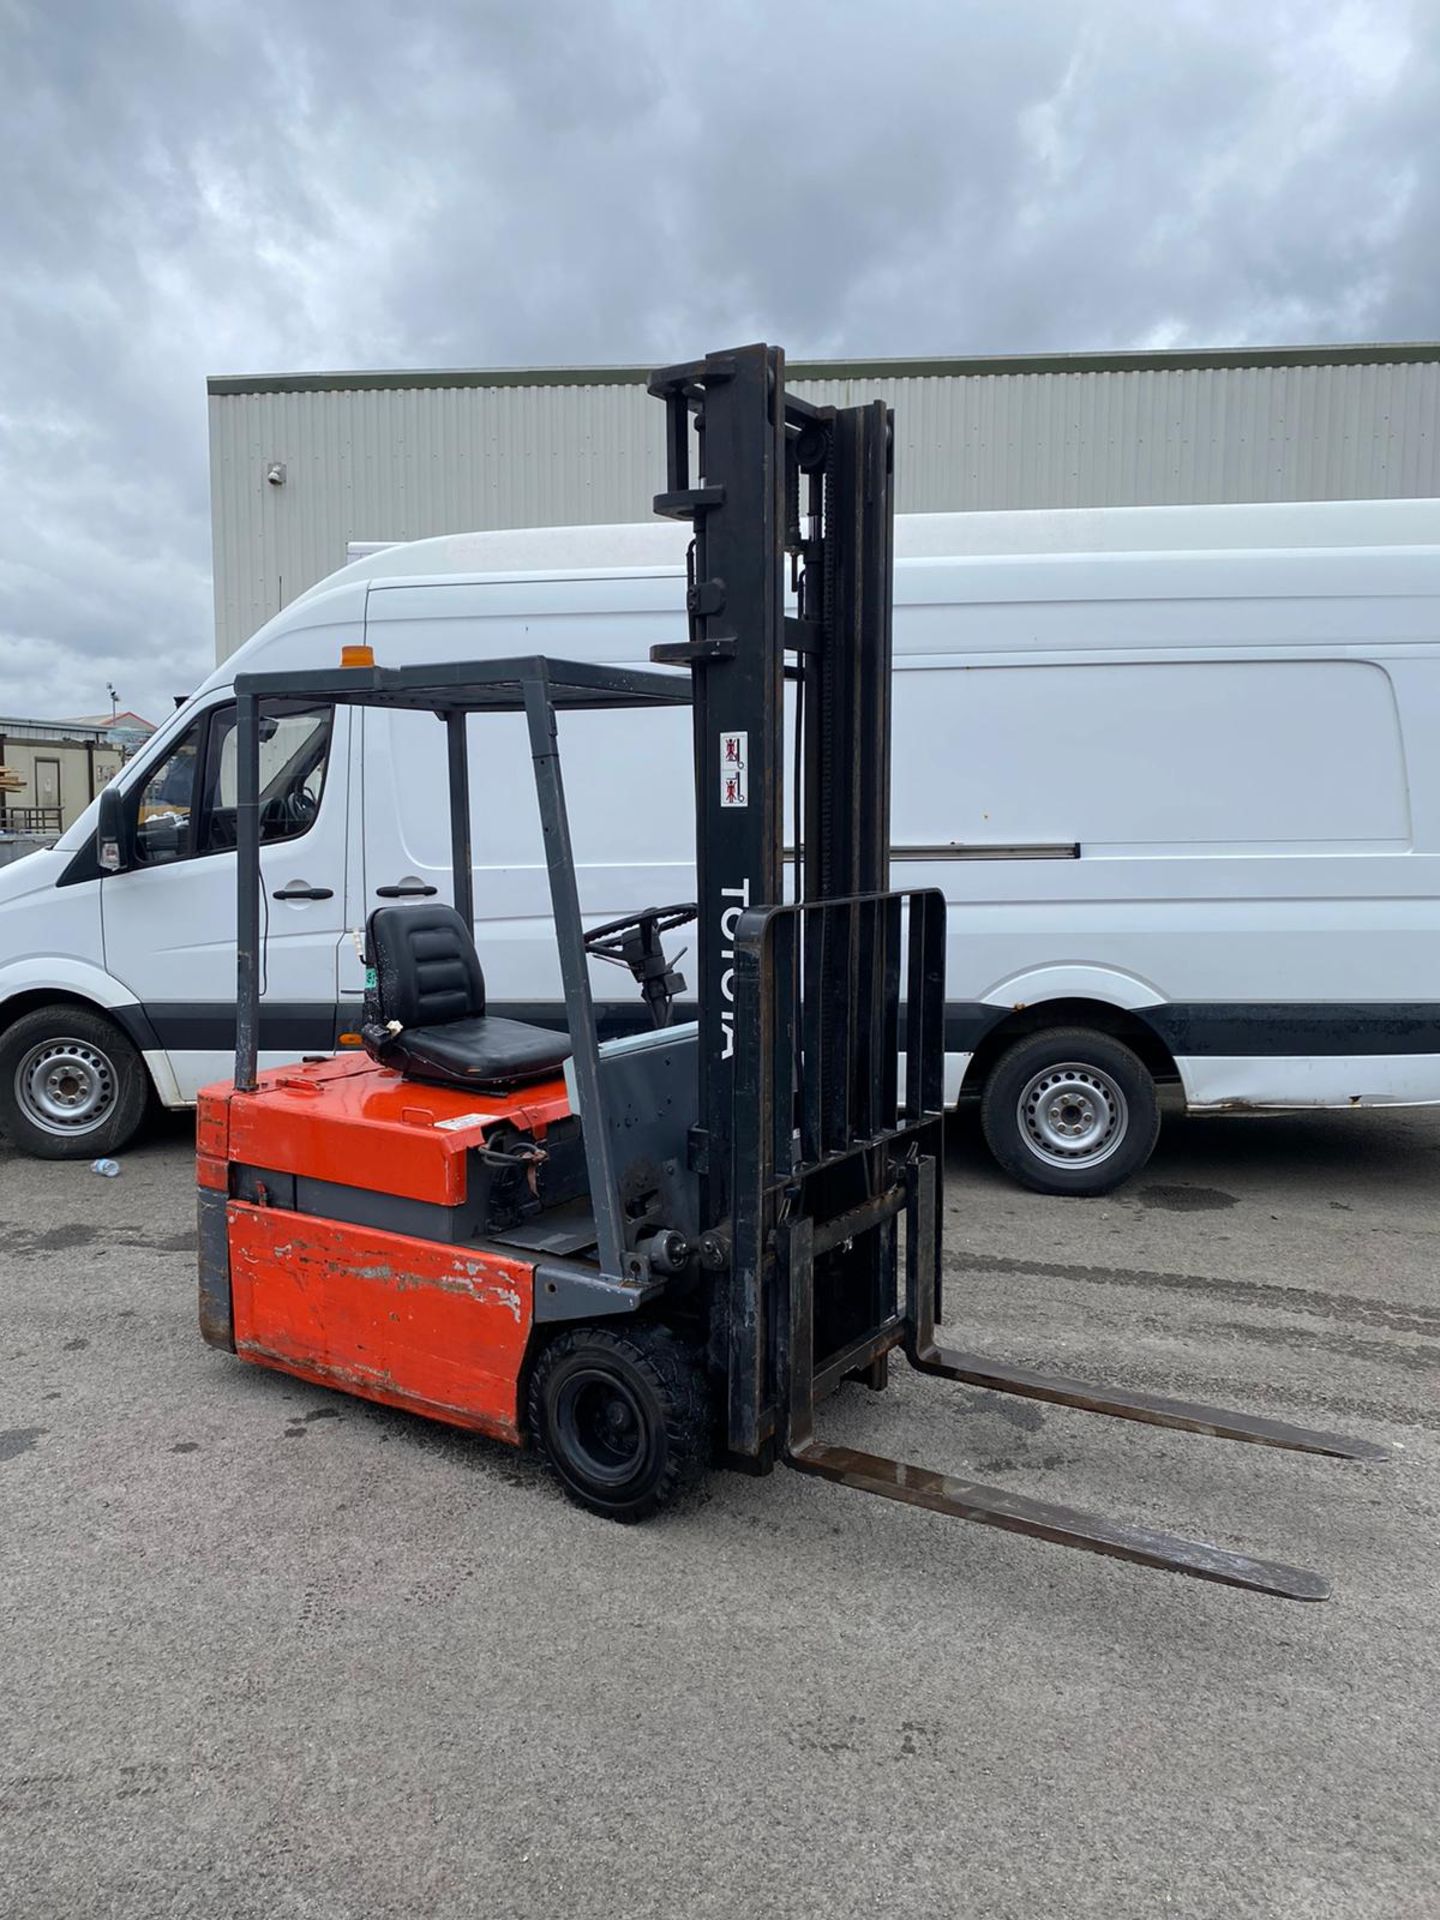 TOYOTA 1.8 TON ELECTRIC FORKLIFT - SHOWING 1450 HOURS - 4M LIFT - WITH SINGLE PHASE CHARGER